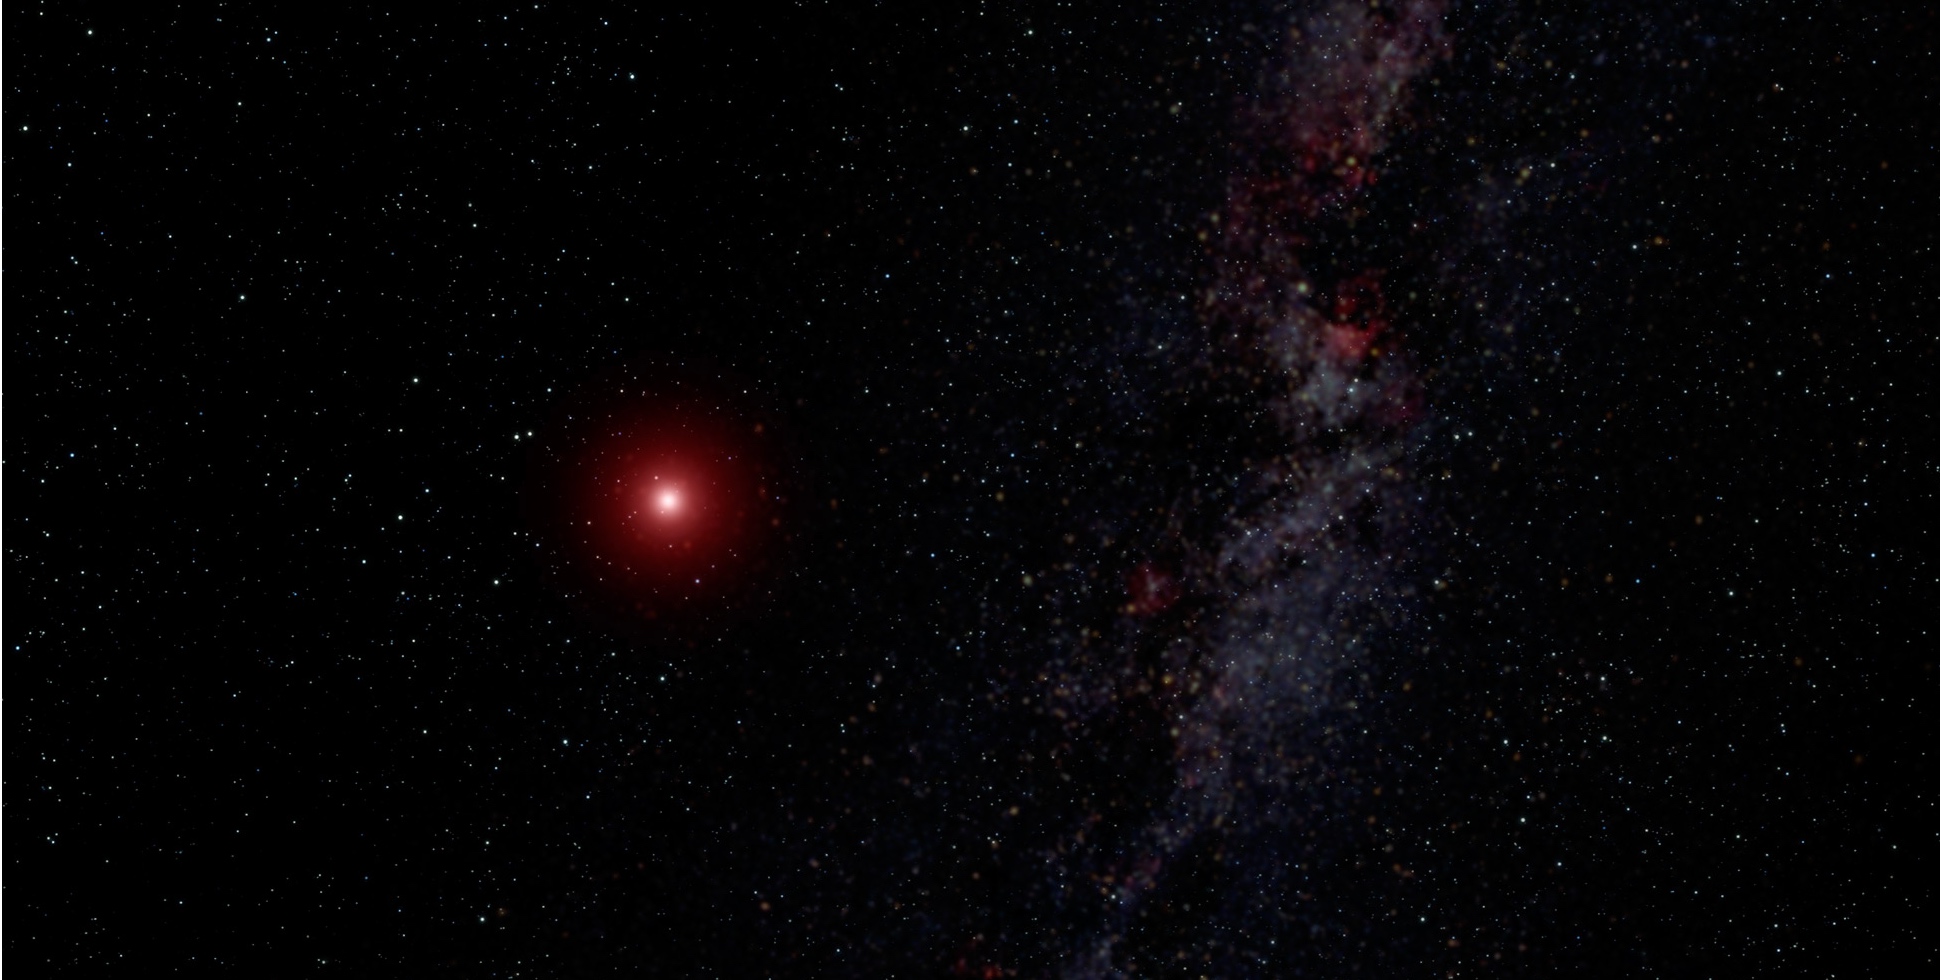 Illustration d’une naine rouge ultrafroide. © Nasa, ESA, G. Bacon (STScI)